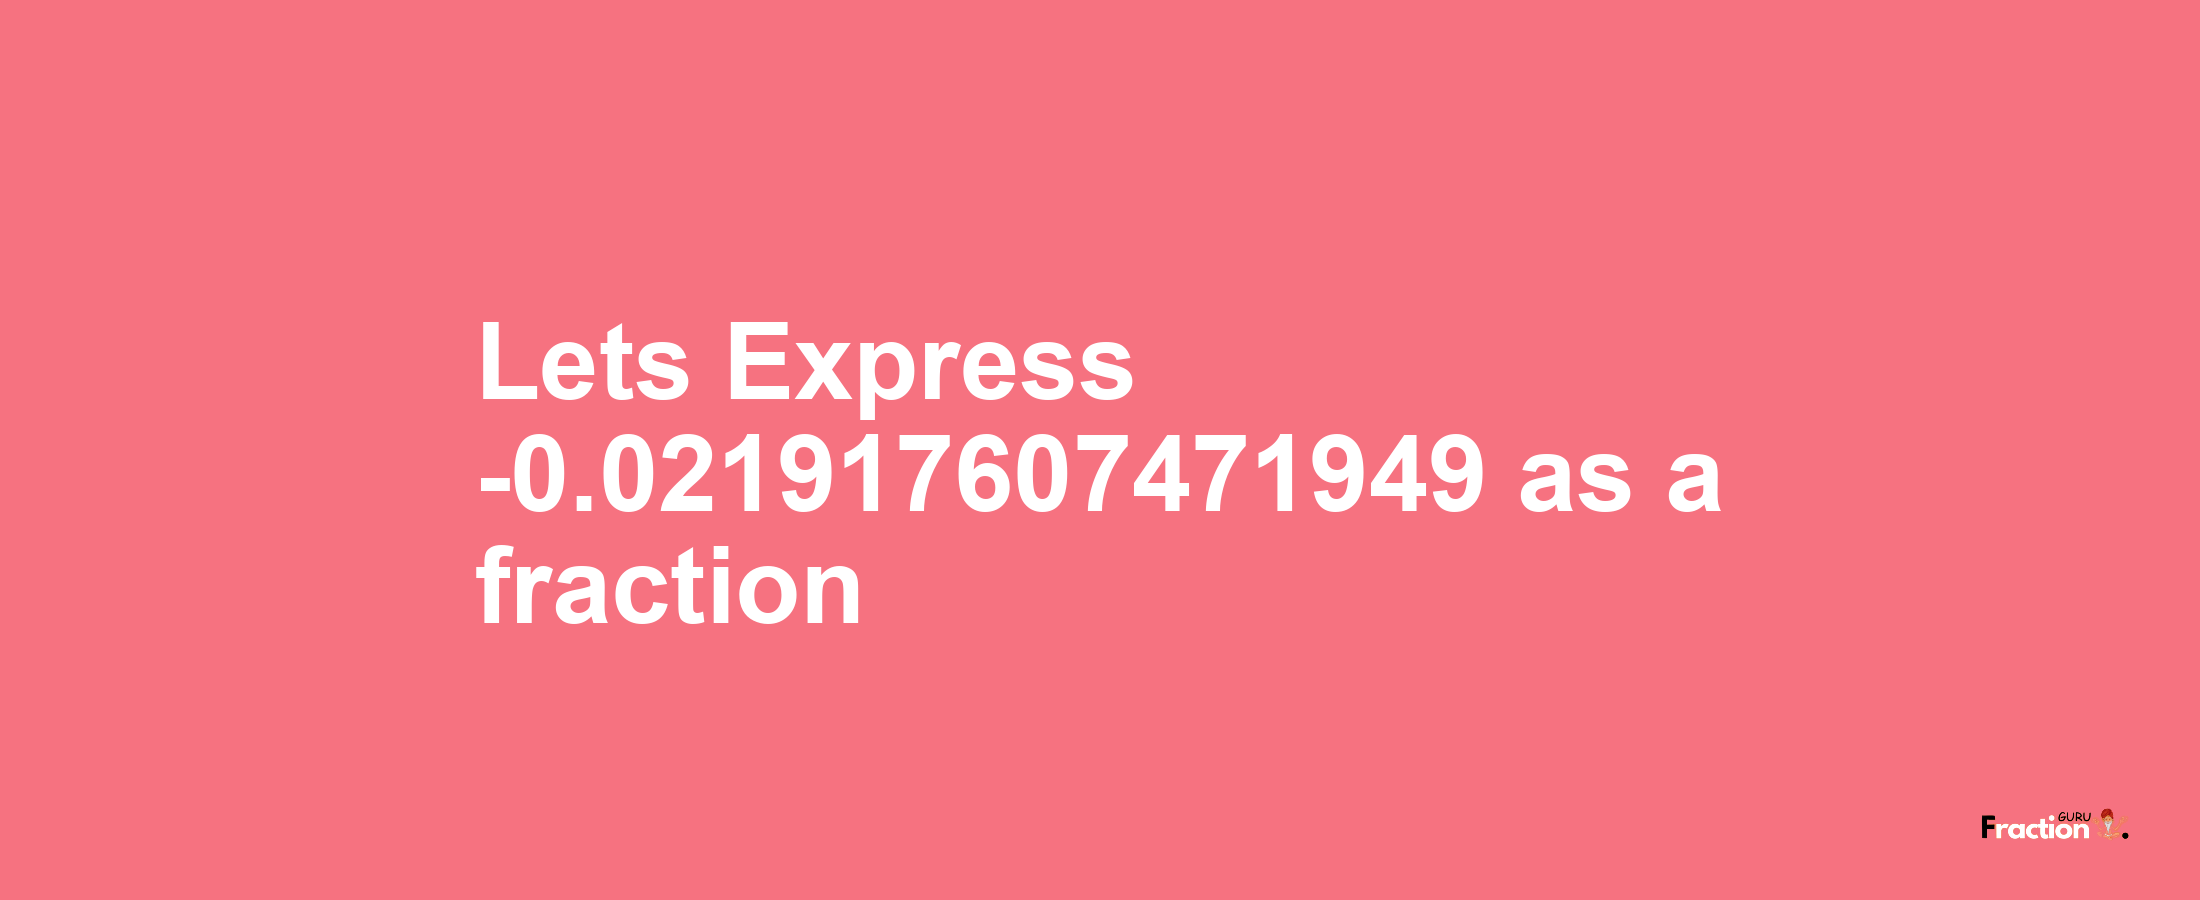 Lets Express -0.021917607471949 as afraction